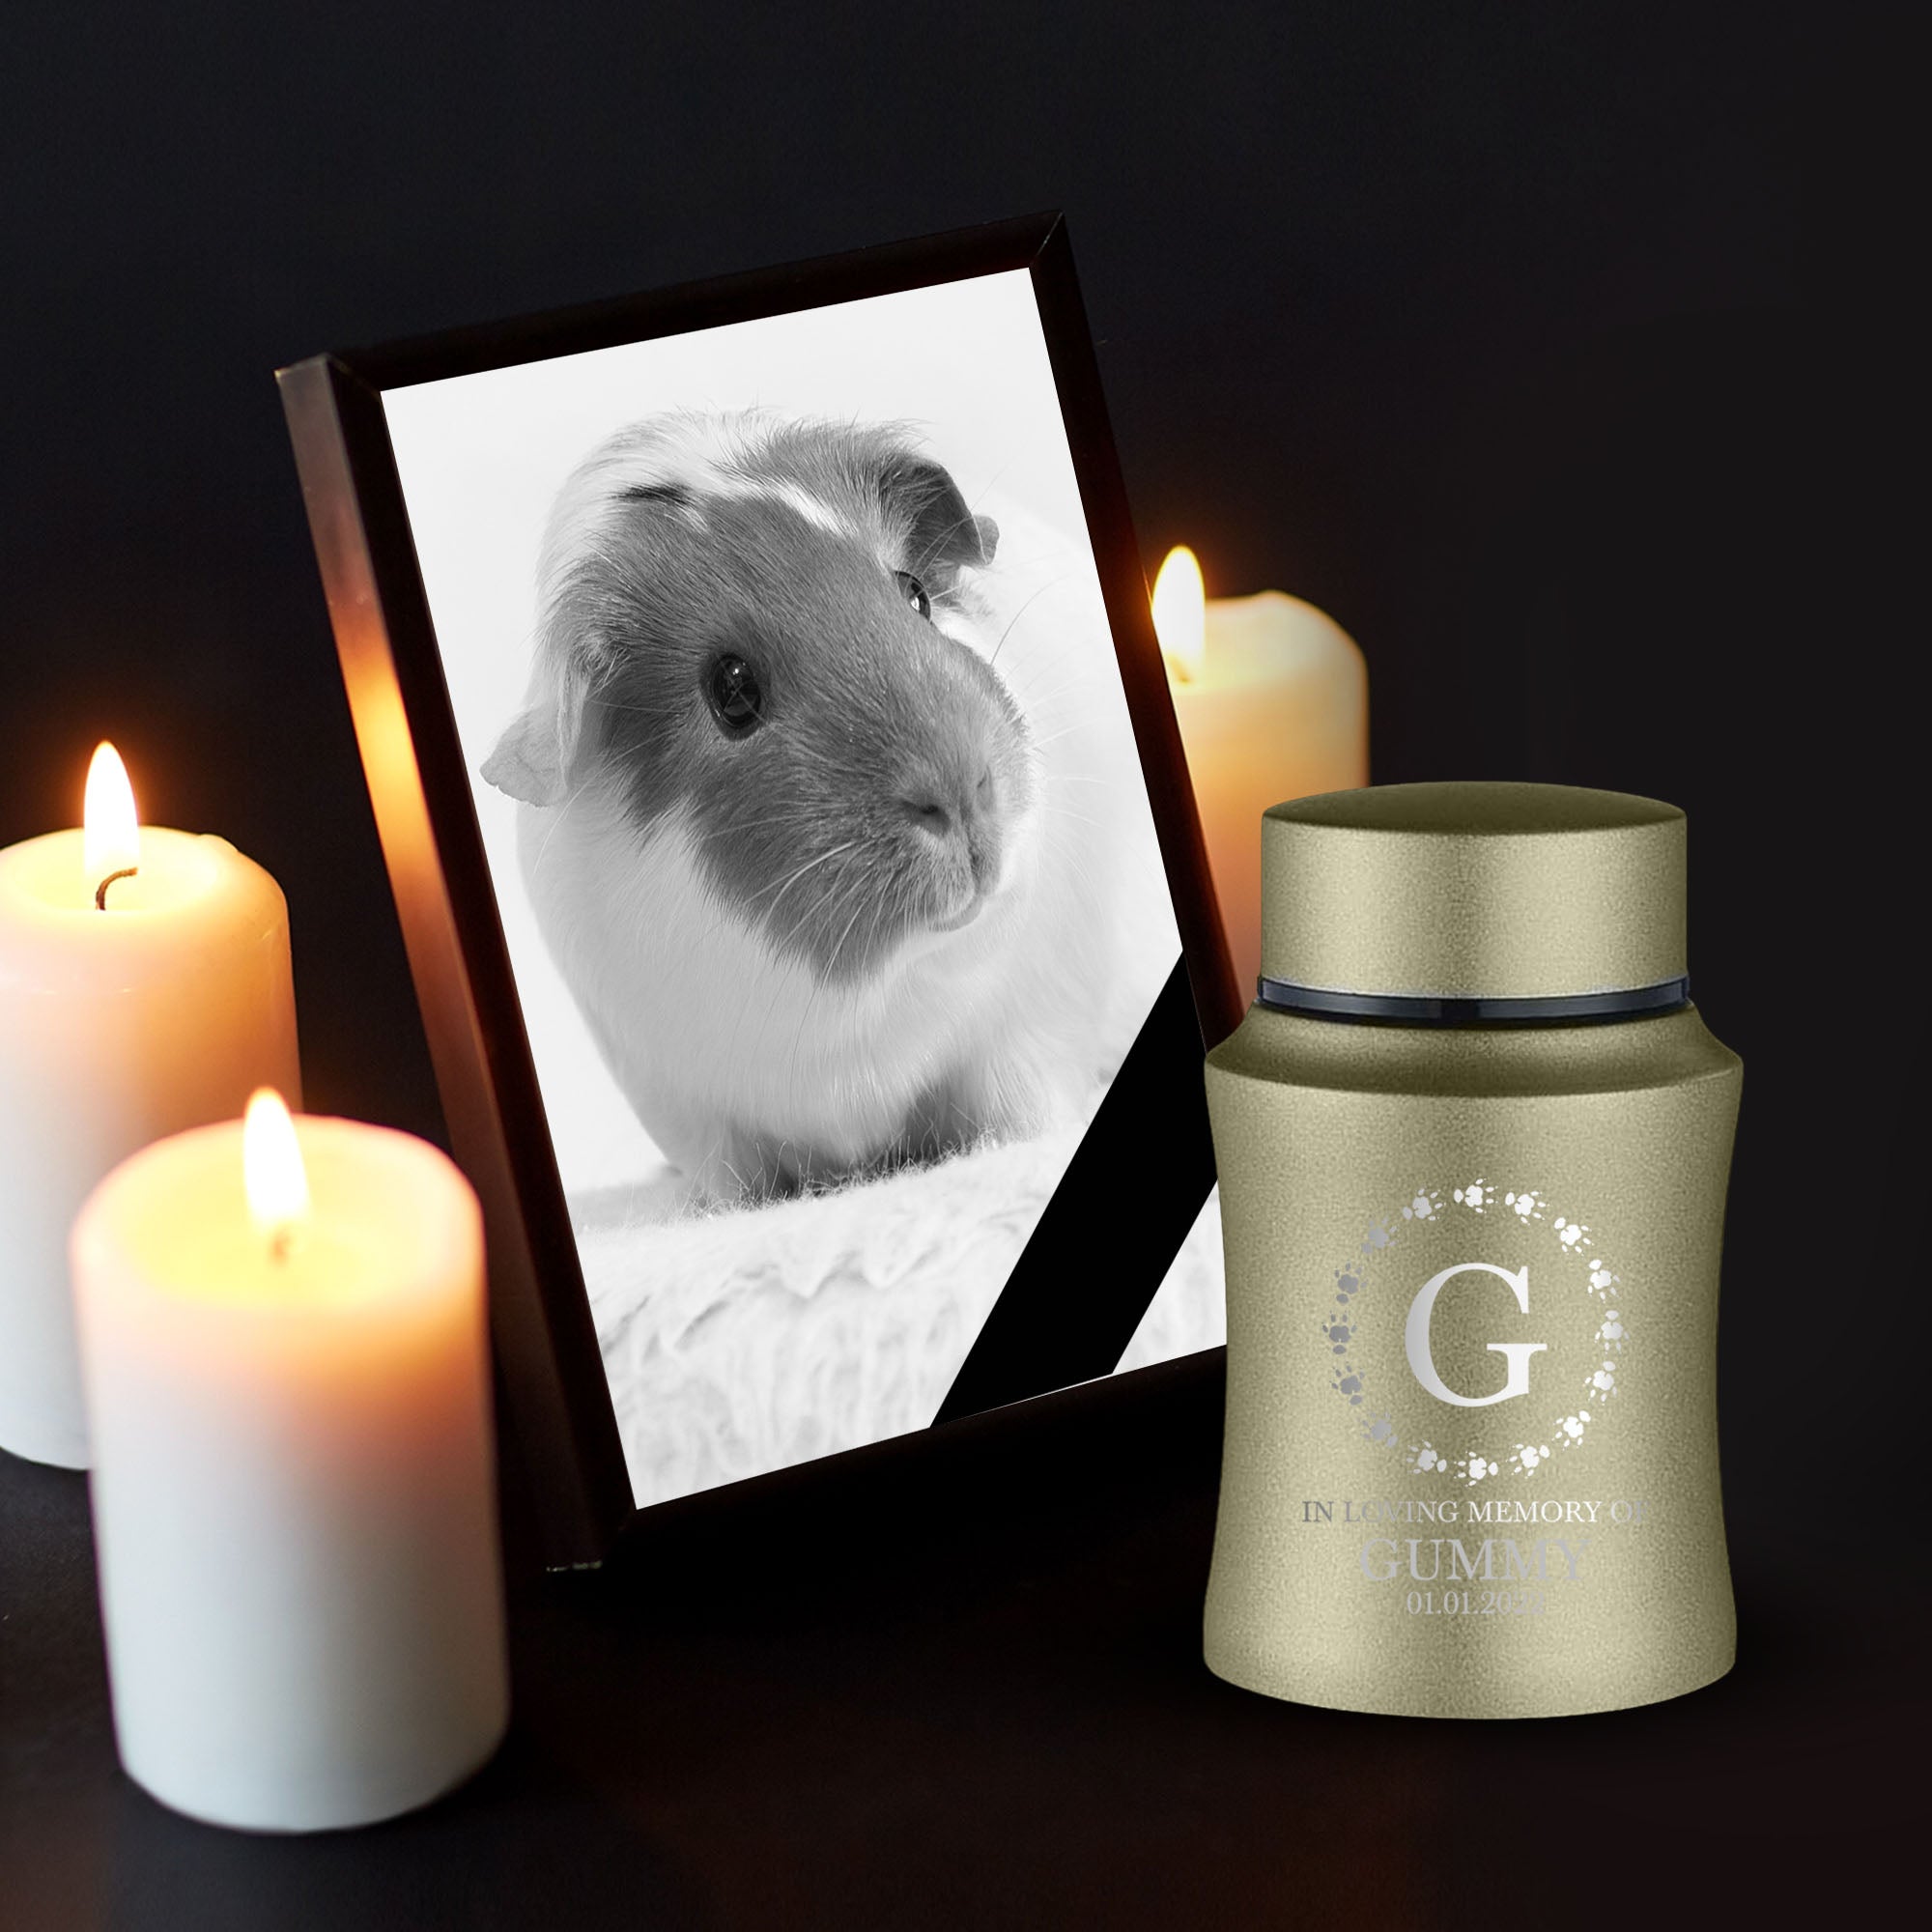 Customized Small Keepsake Urn Personalized Engraved with Pet Name, Date, and Text - 4" Powder Coated Cremation Mini Compact Urn for Guinea Pig Ashes | 5–10 Lbs Capacity.